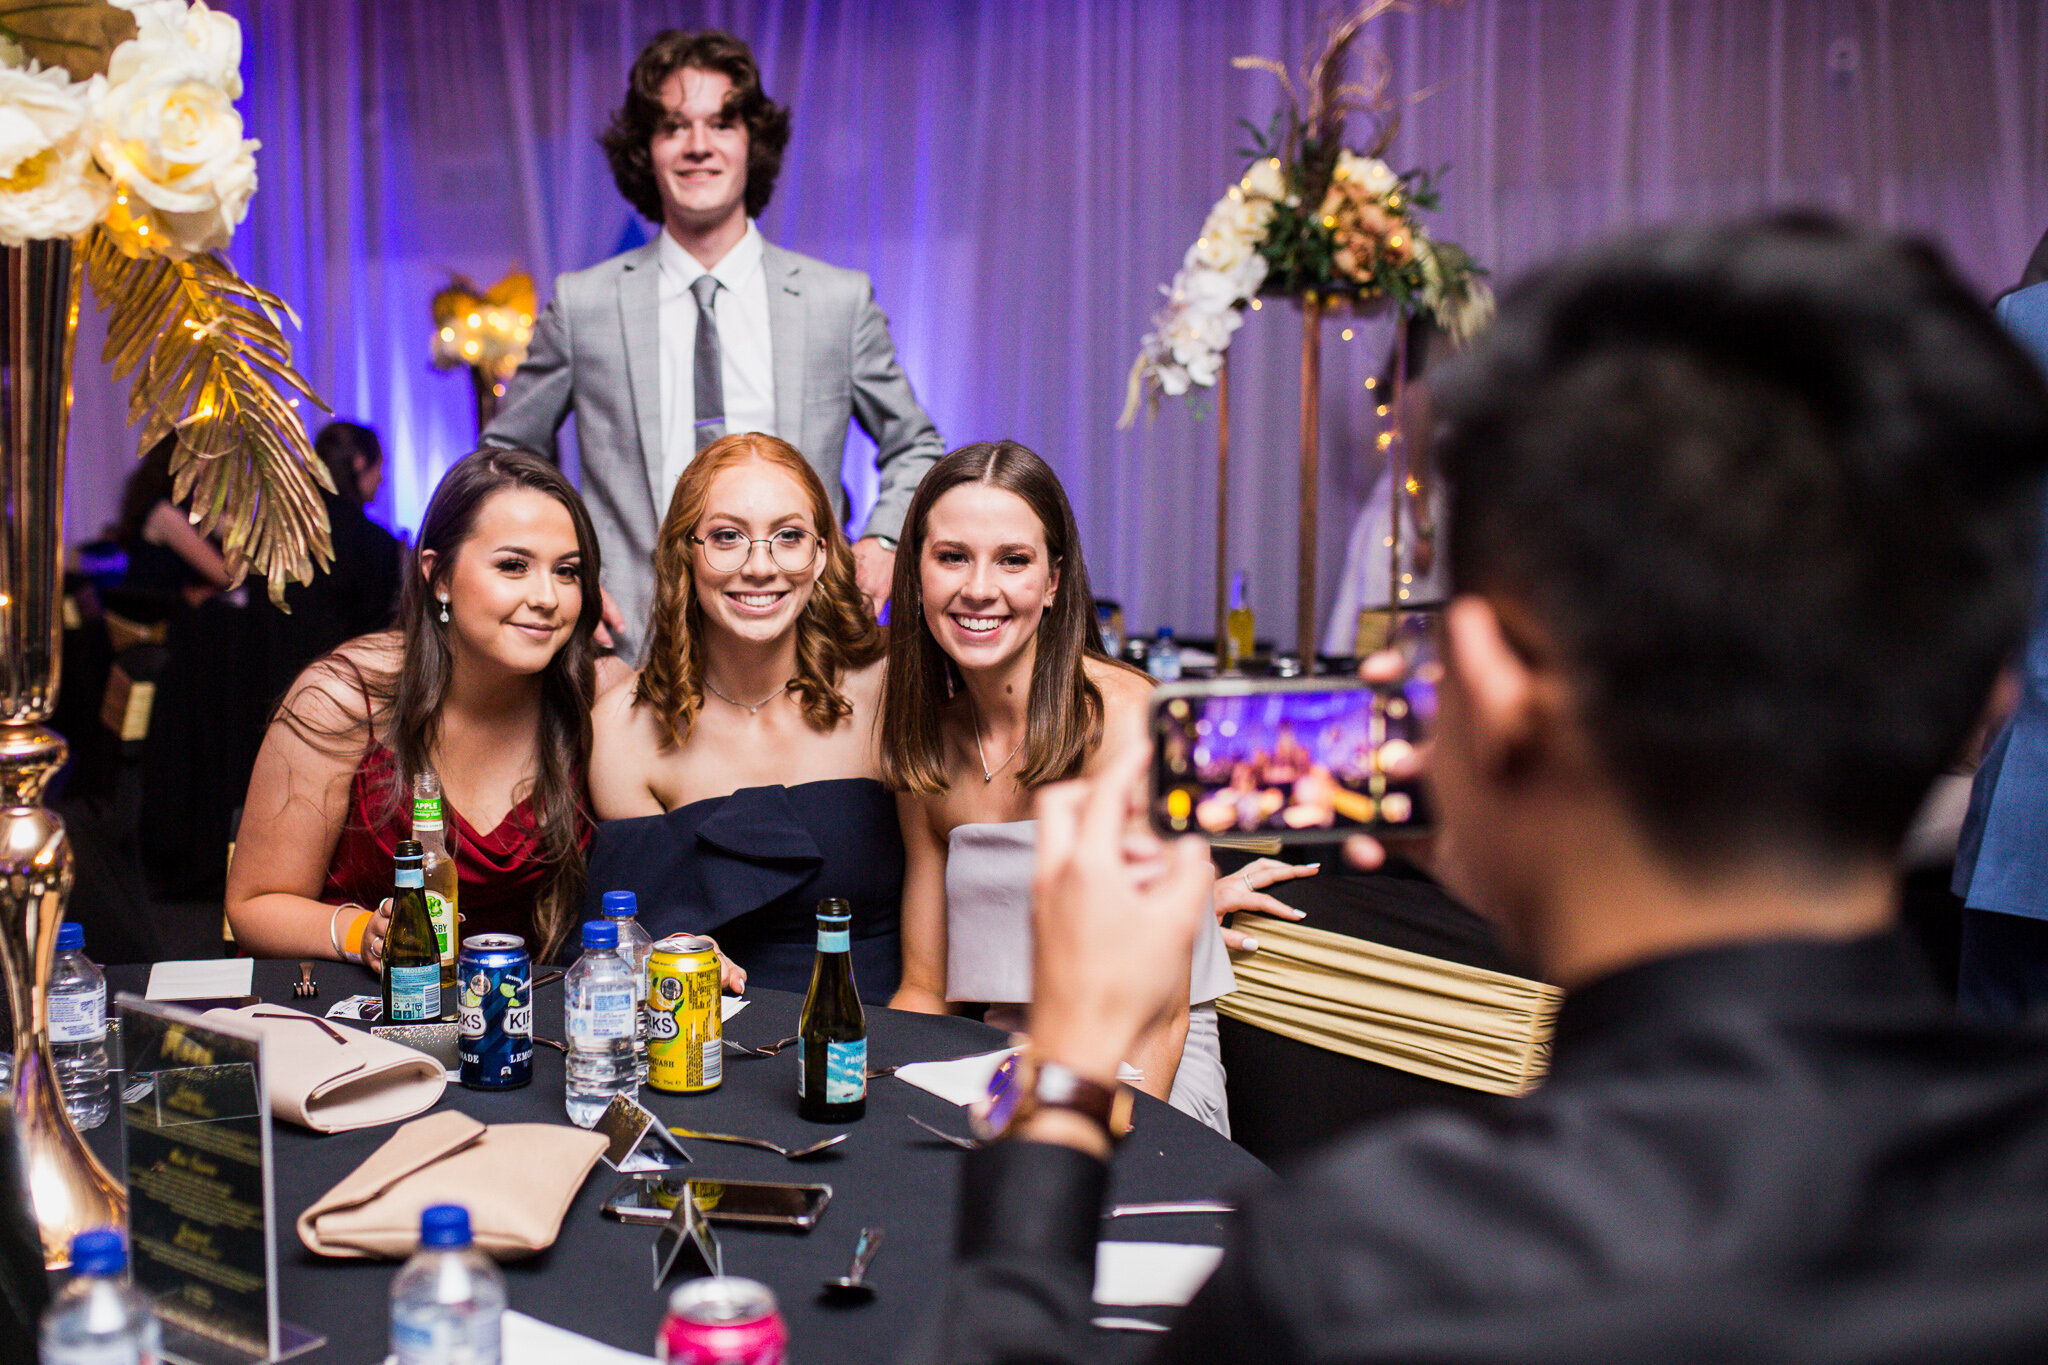 Canberra Formal Photography - Man takes photo of friends at school formal